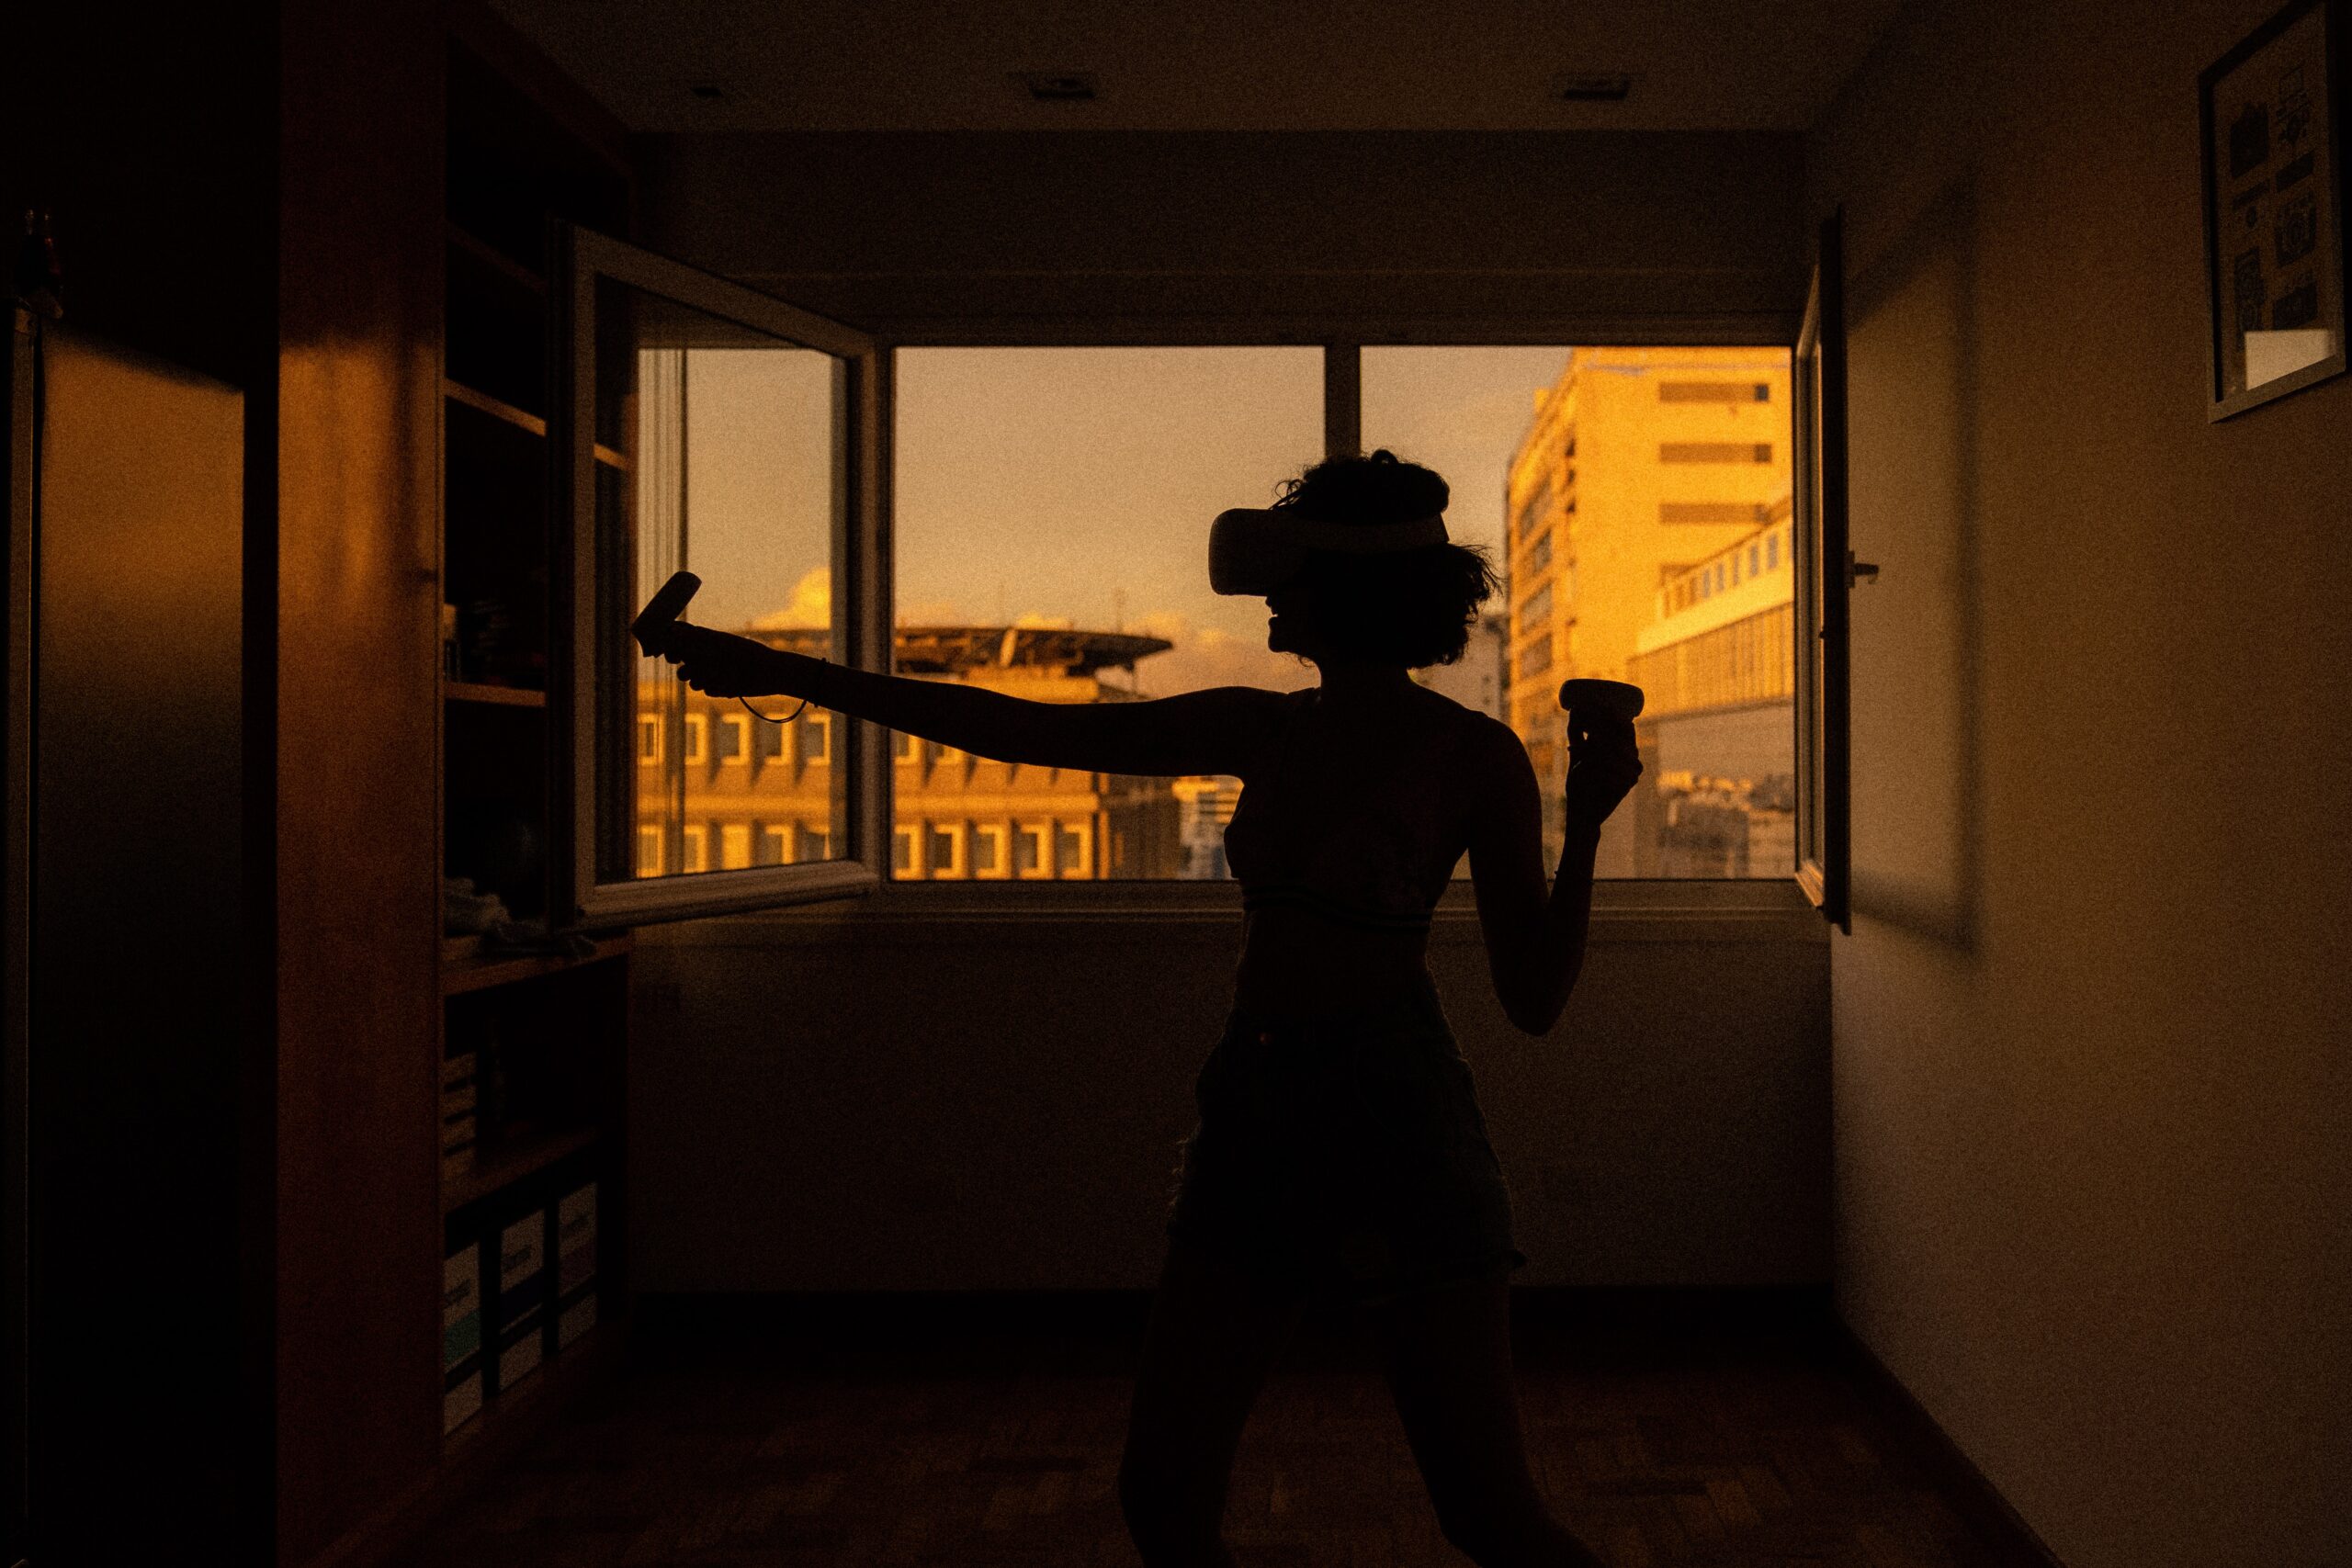 Silhouette of woman standing near window sill using VR